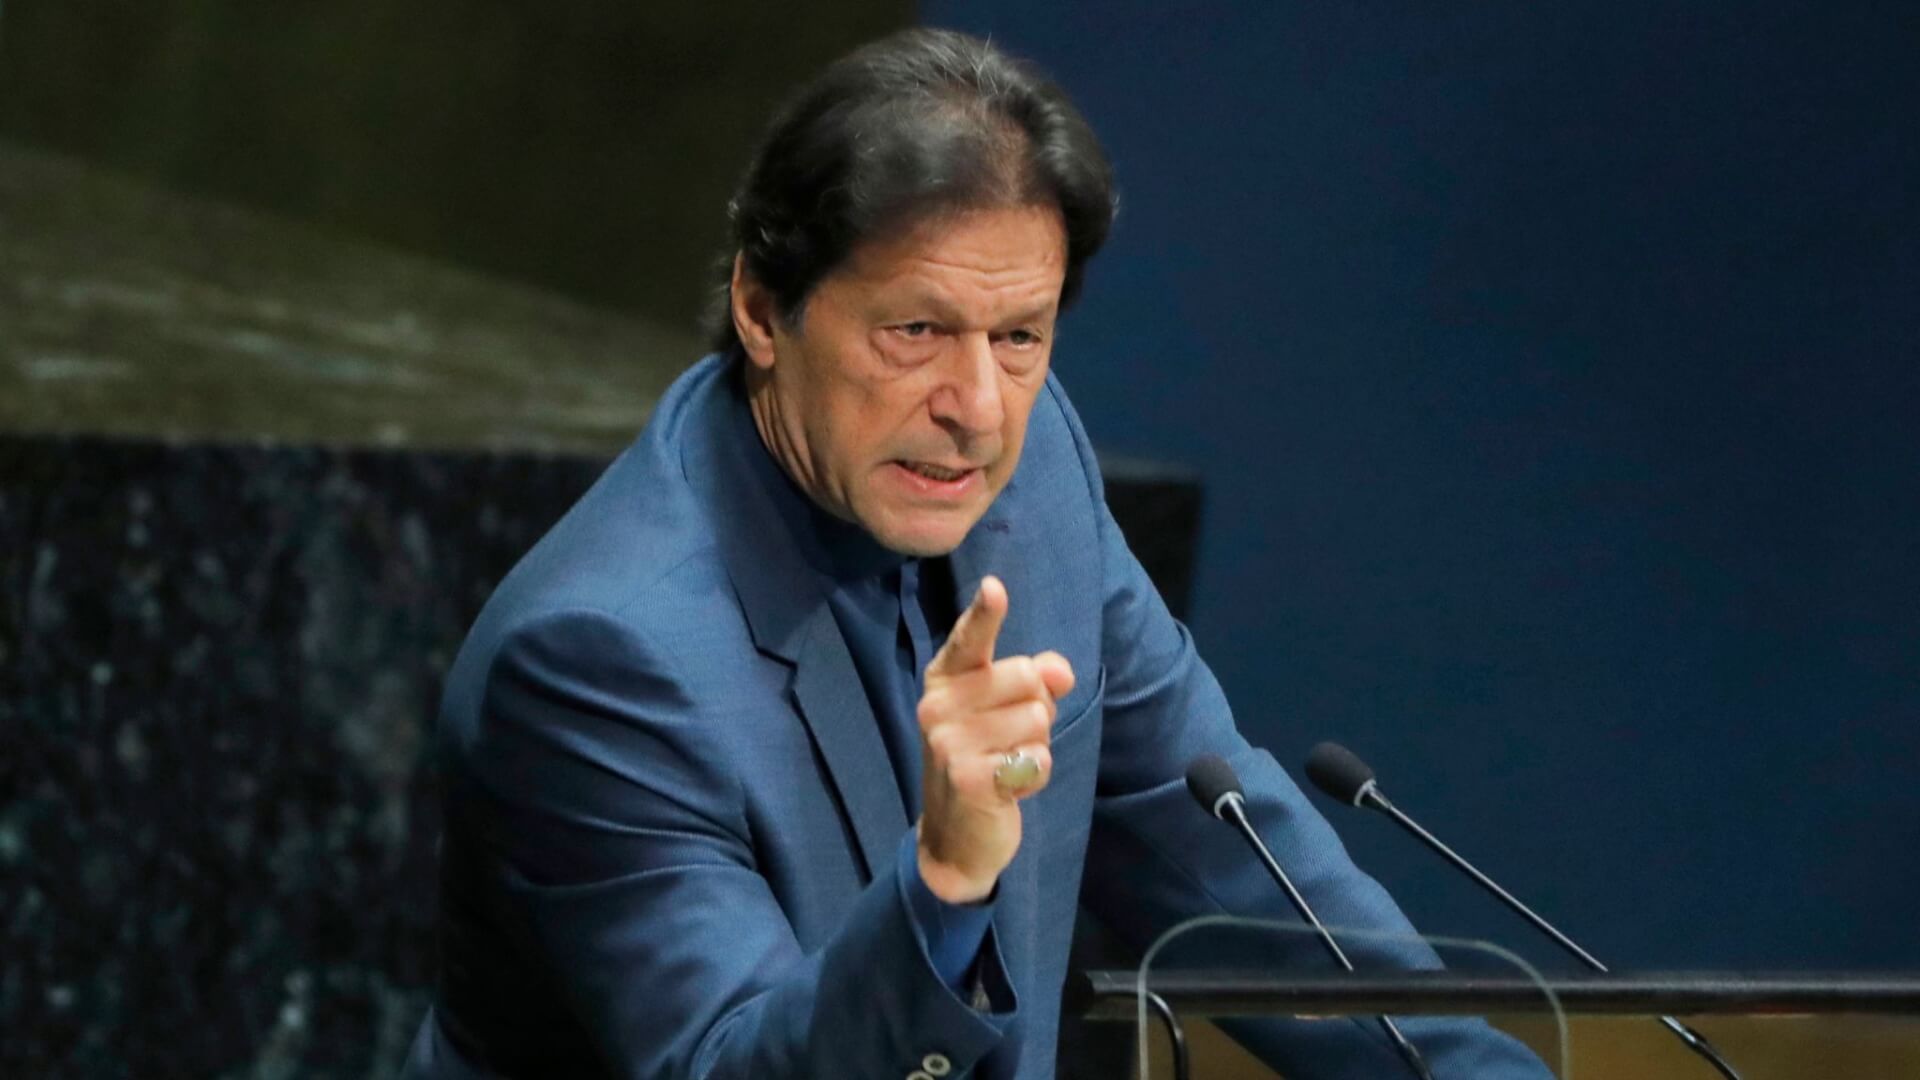 Imran Khan Says He Won’t be “Blackmailed” by Machh Attack Victims’ Families